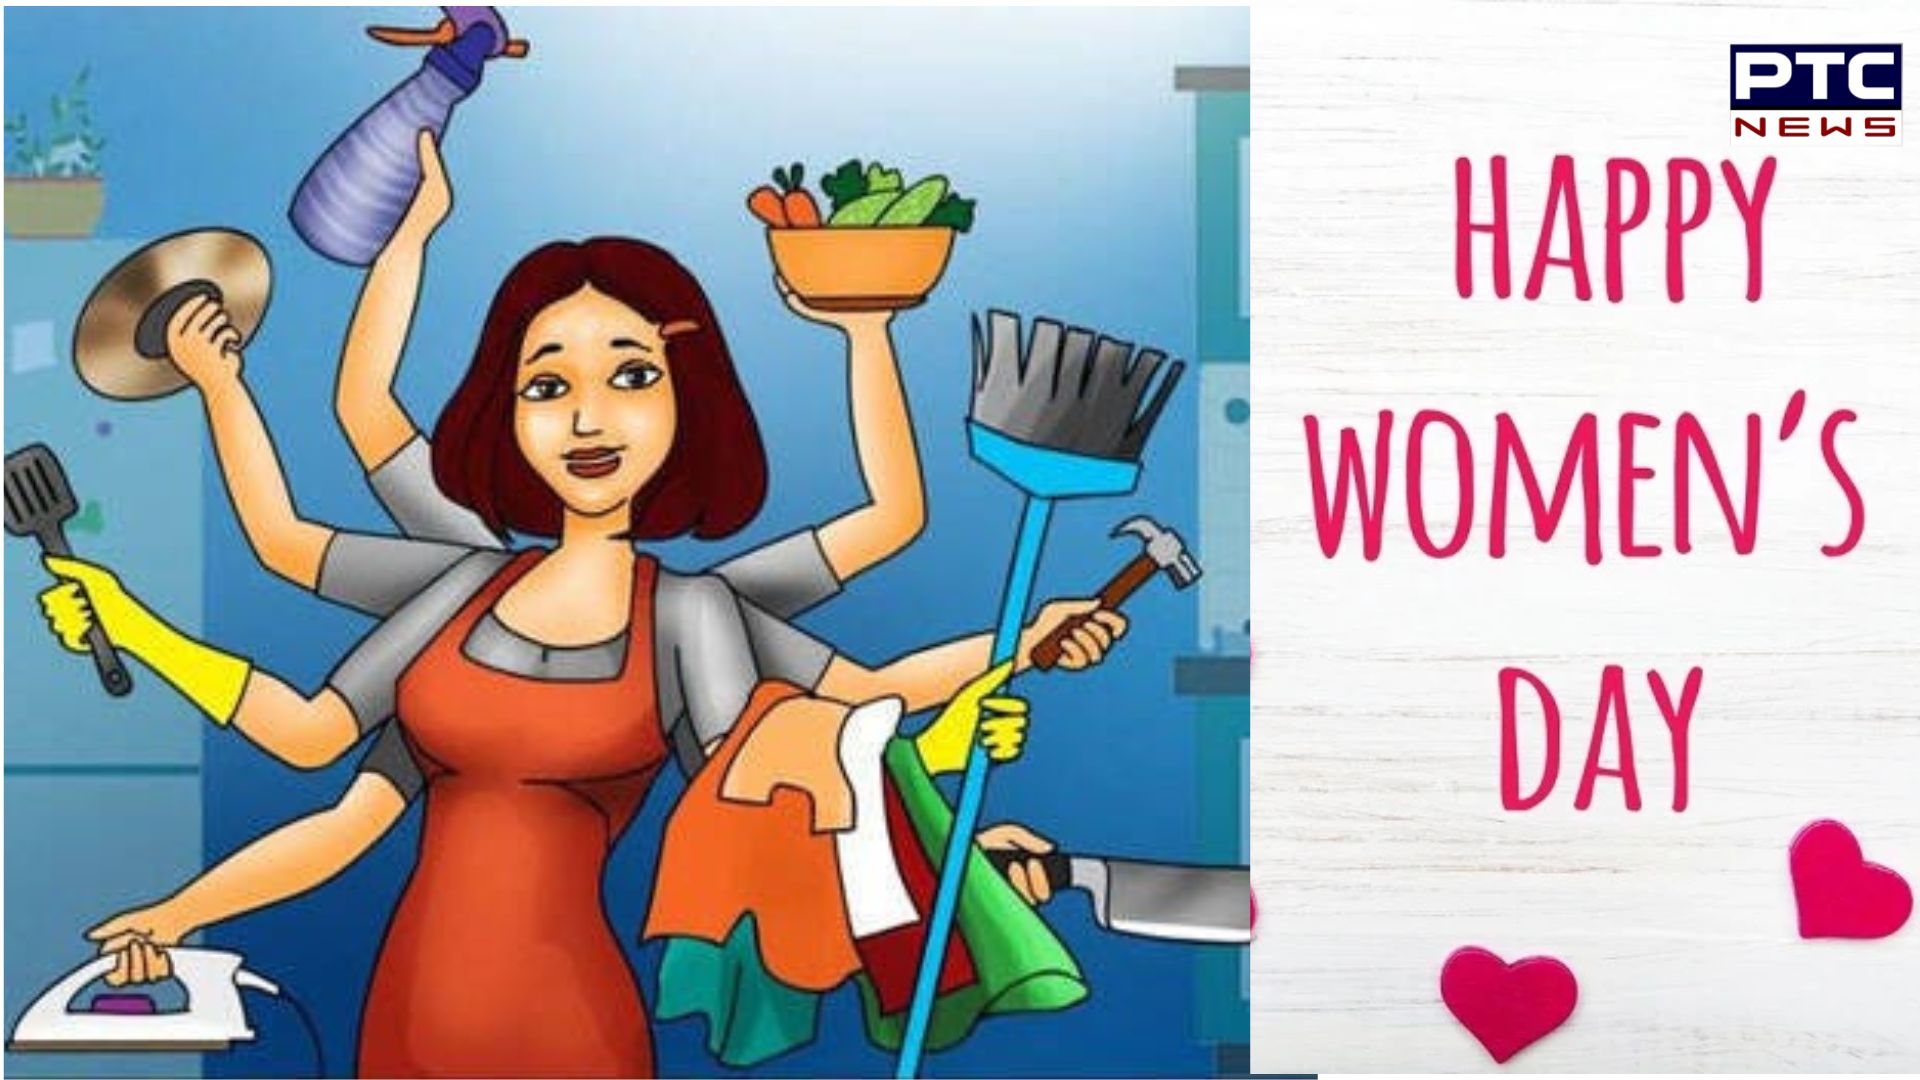 International Women's Day: Whether a working mom or homemaker: She needs applause, not judgement!